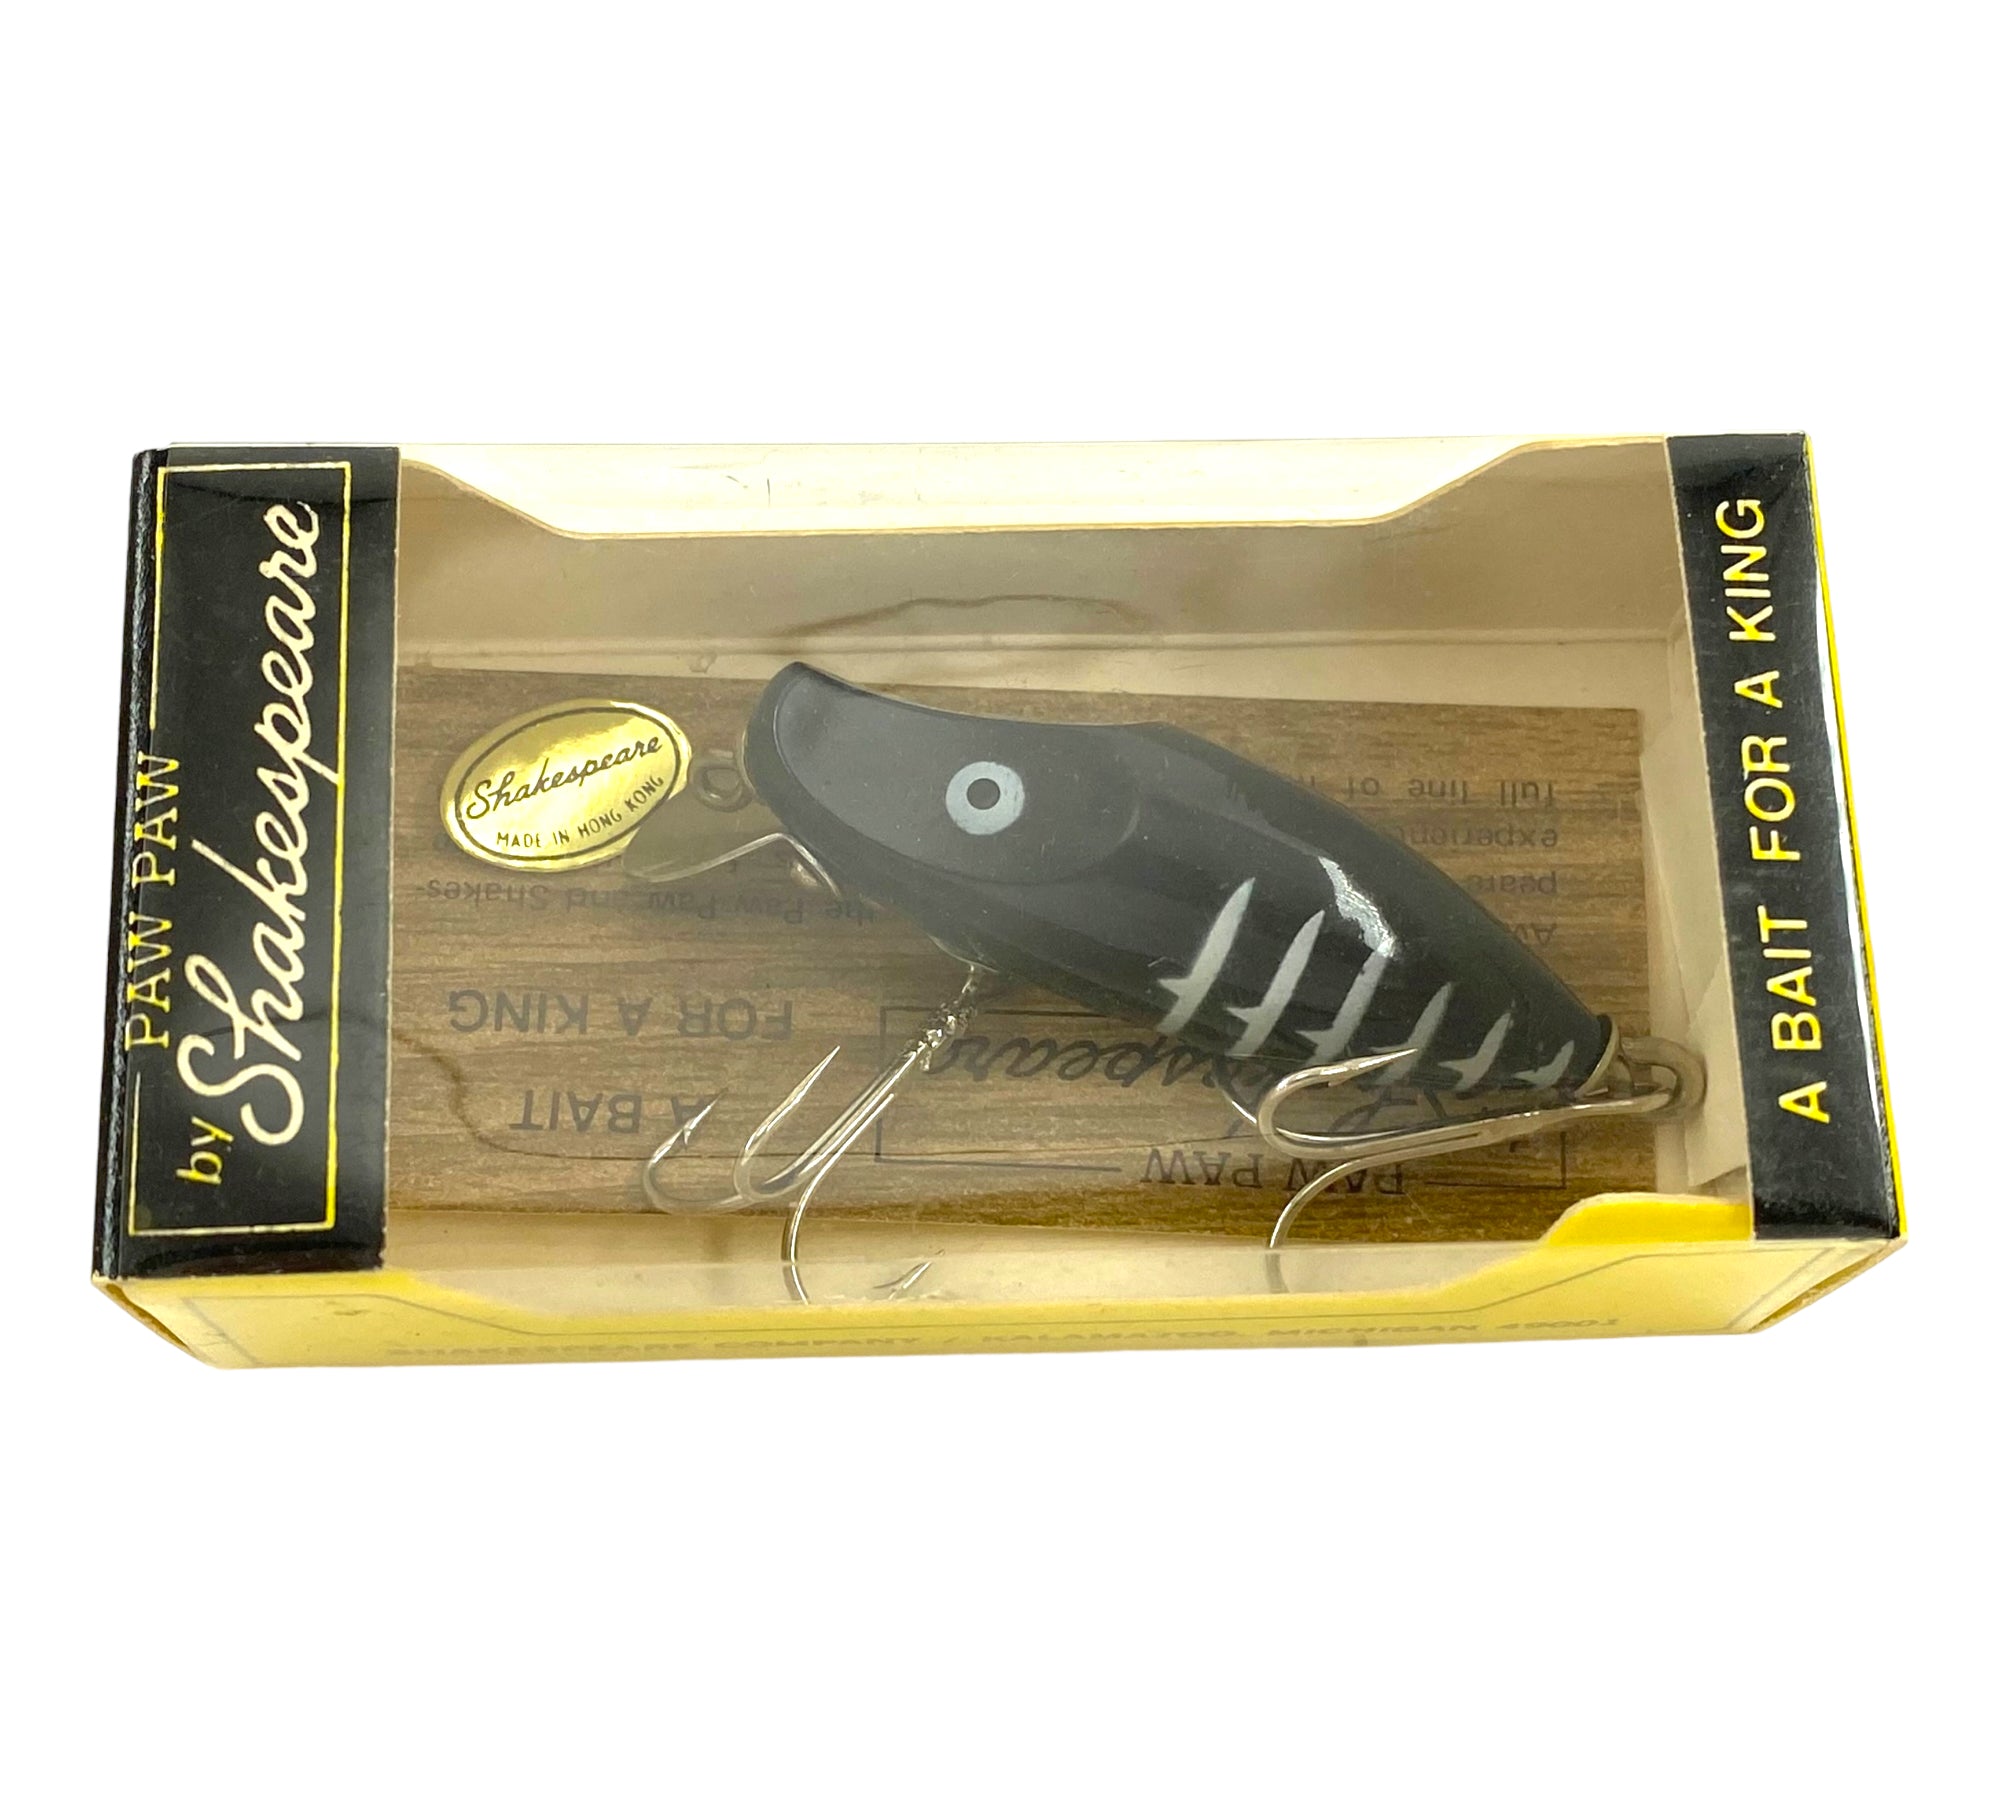 Paw Paw by SHAKESPEARE RIVER RUNT Fishing Lure • #3962 • BLACK